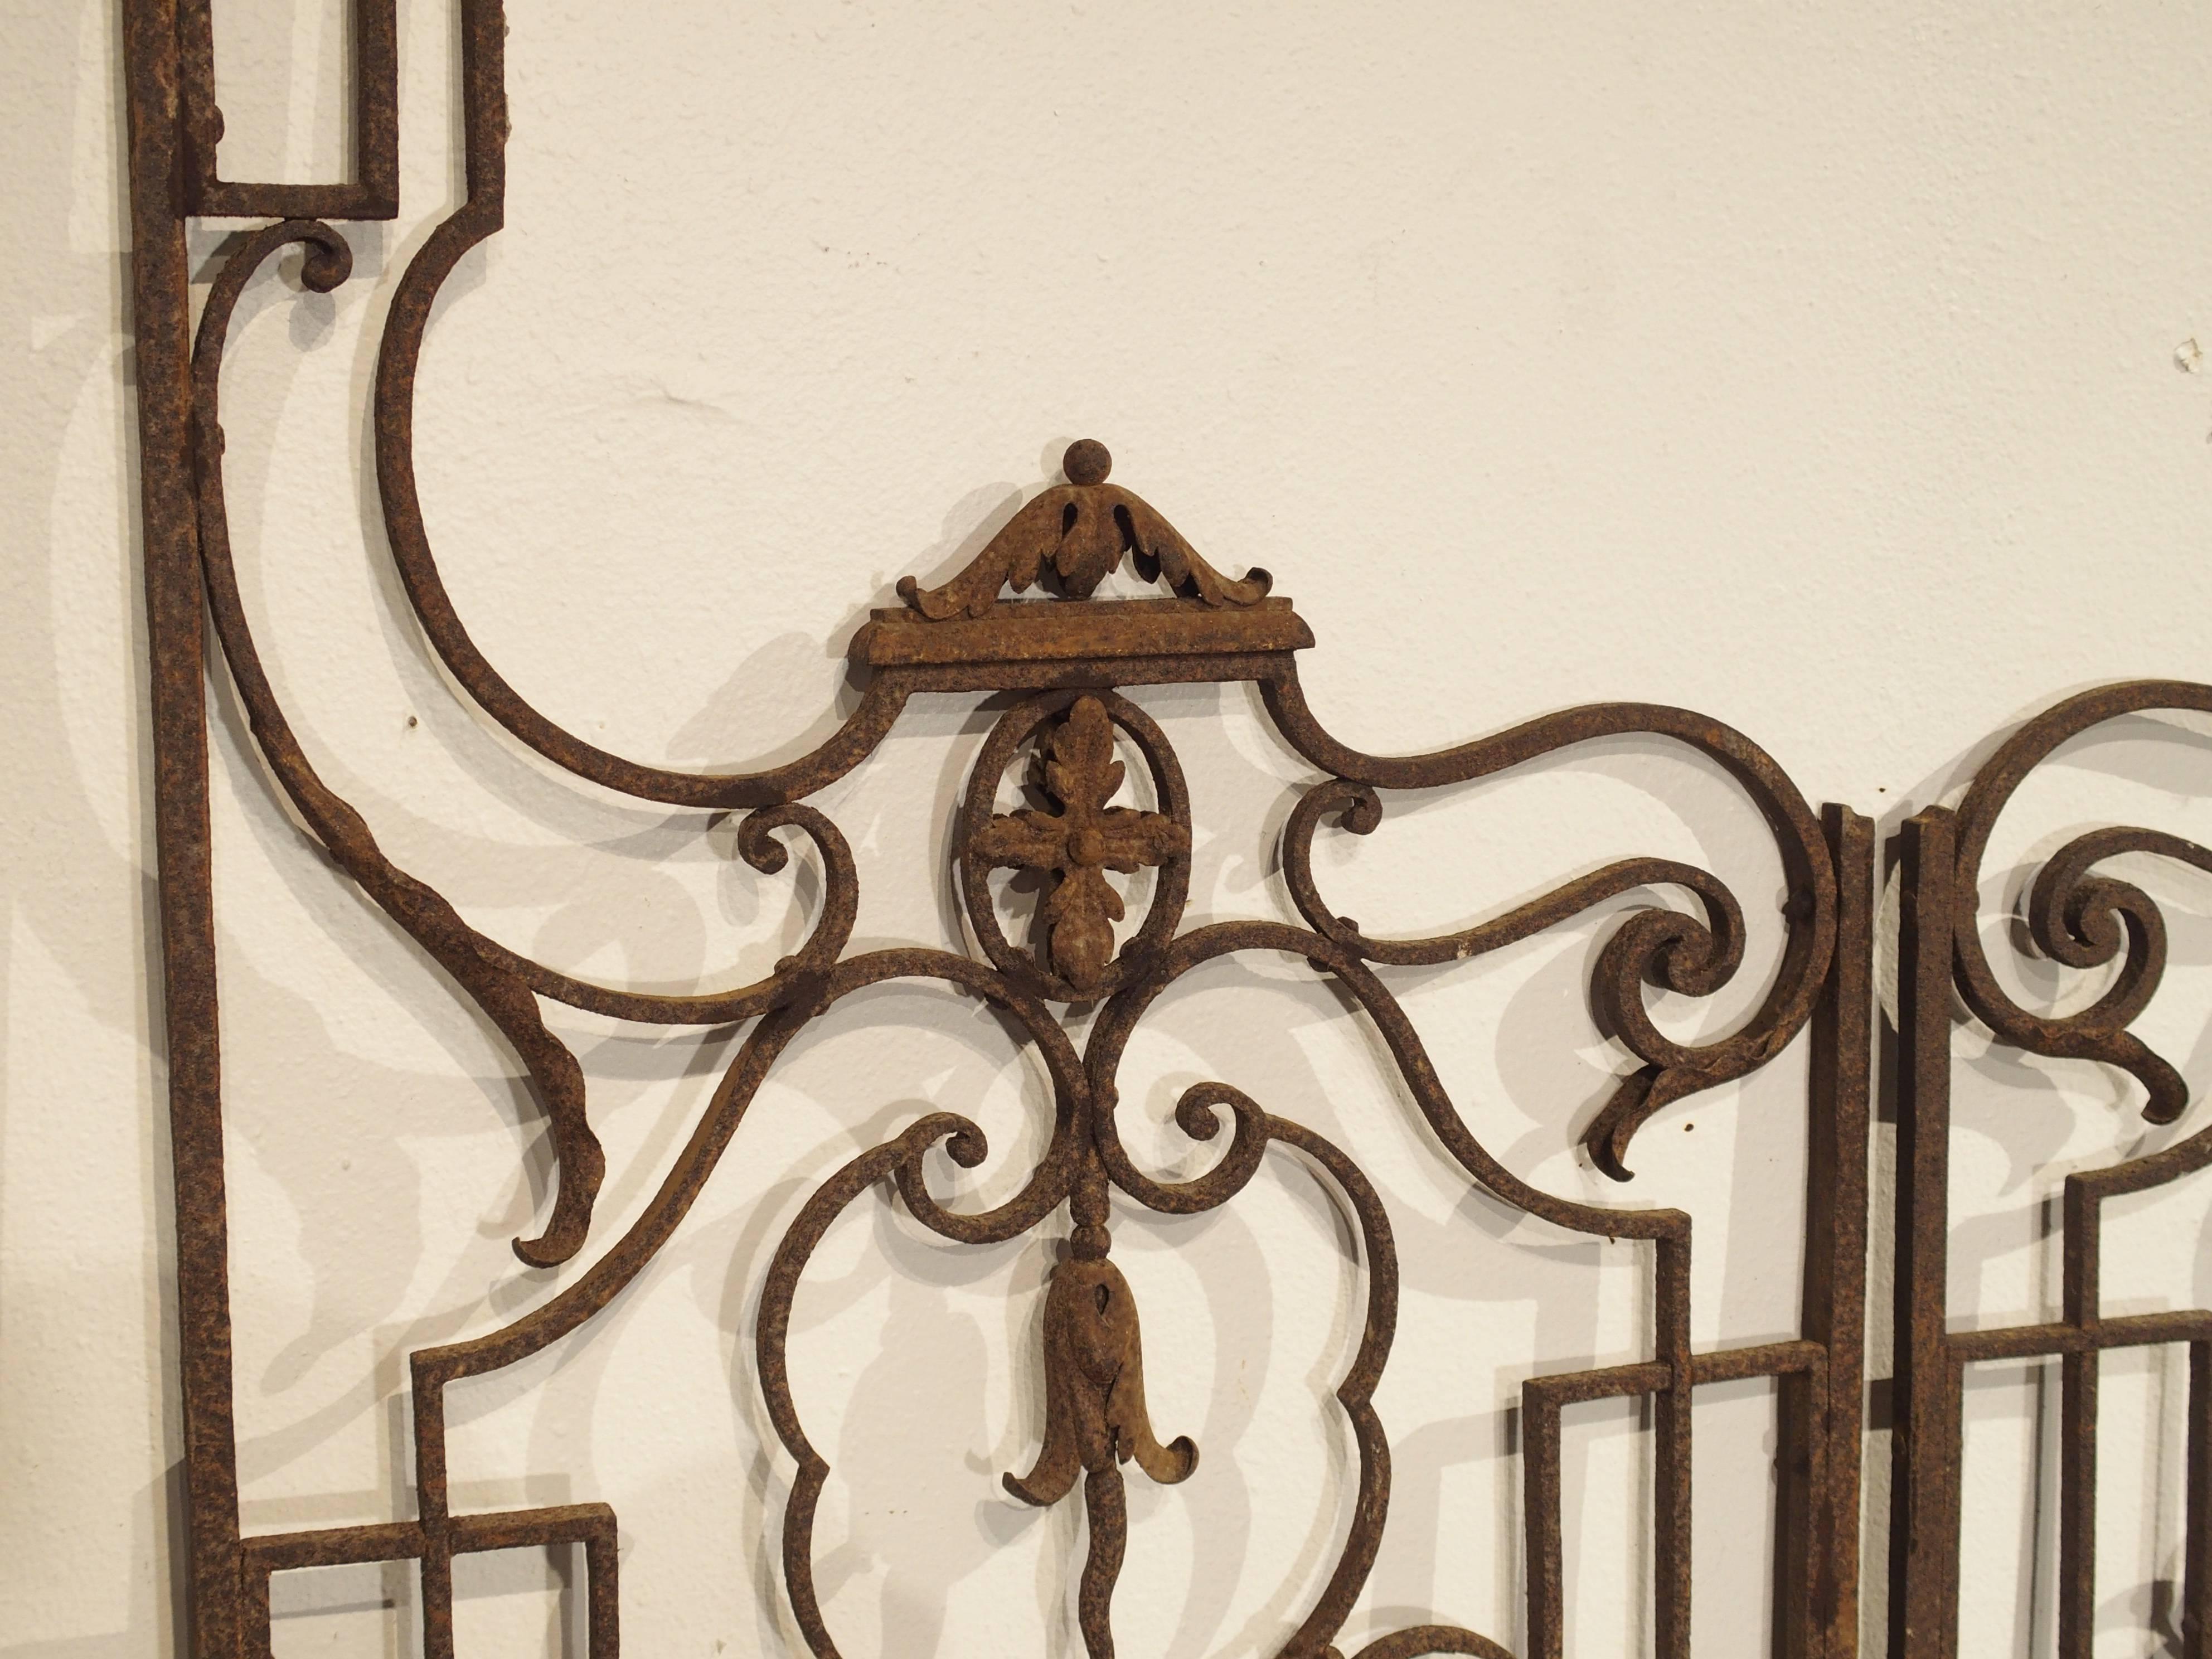 This elegant pair of antique garden gates from France date to the end of the 19th century. They have geometric and curvilinear motifs giving interest to the interior forms. There is a large swag of wrought iron husks at the centre. These gates could